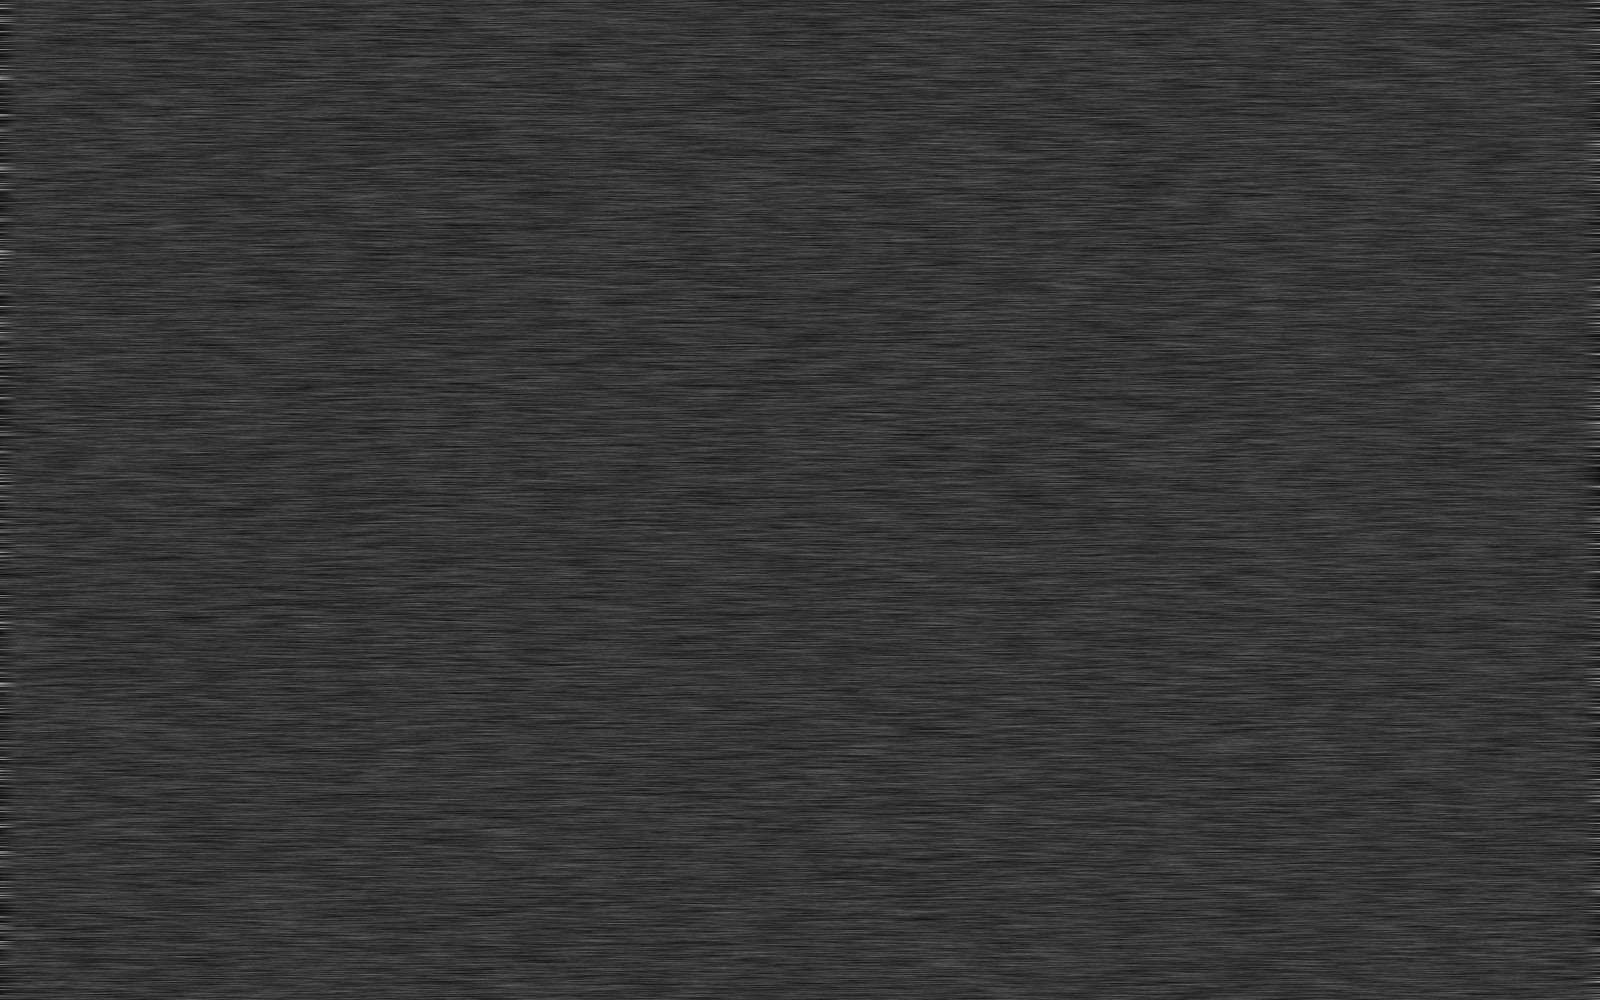 Black Stainless Steel Background